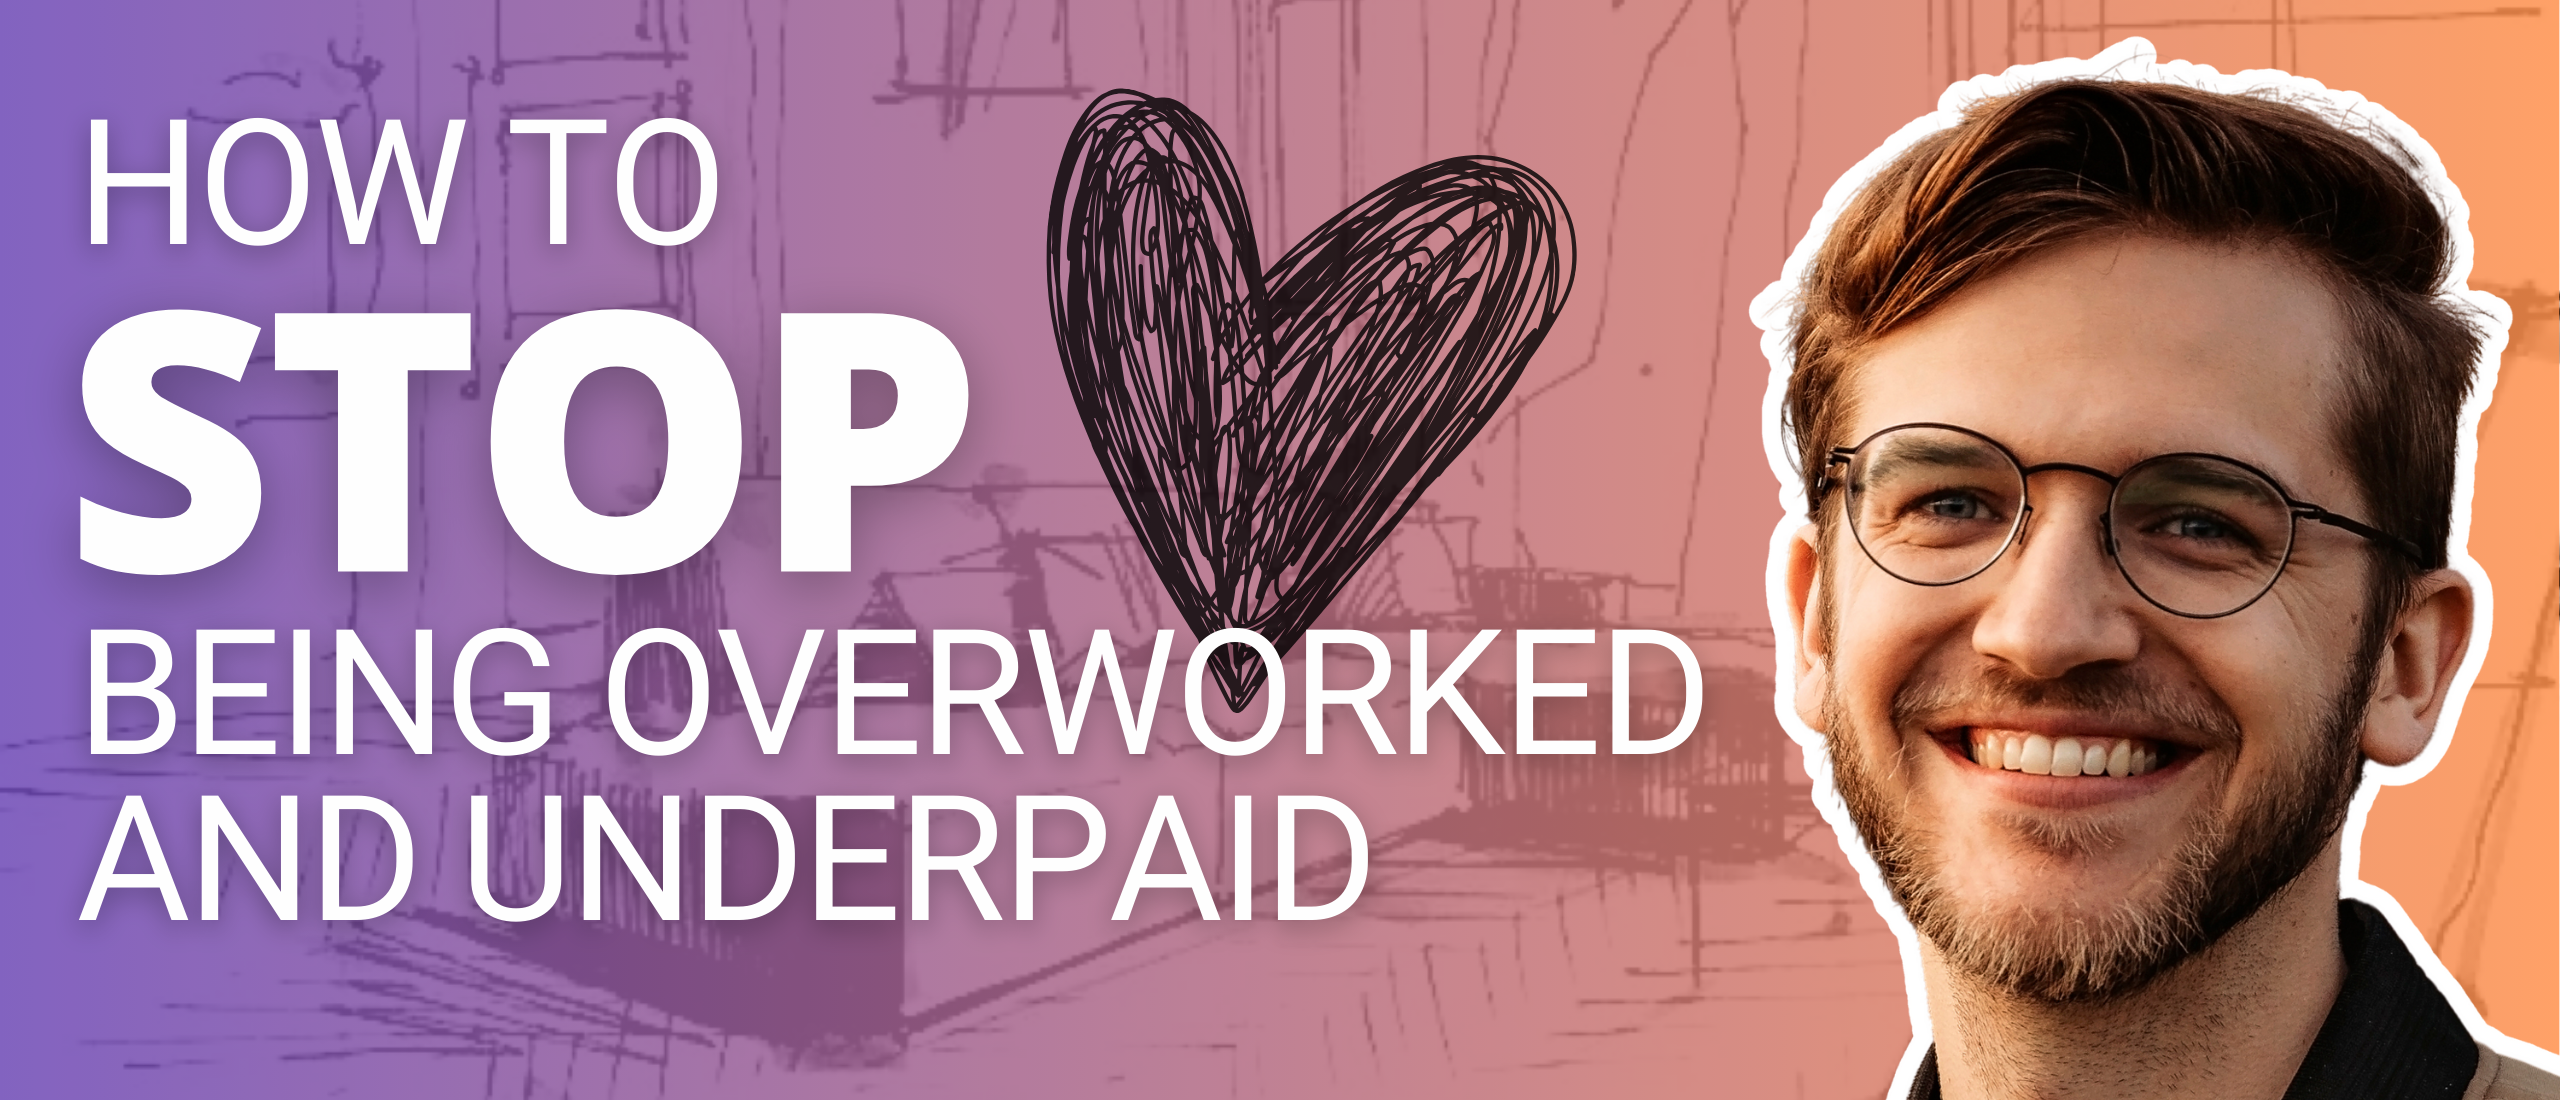 How to stop being overworked and underpaid - with Tyler Suomala